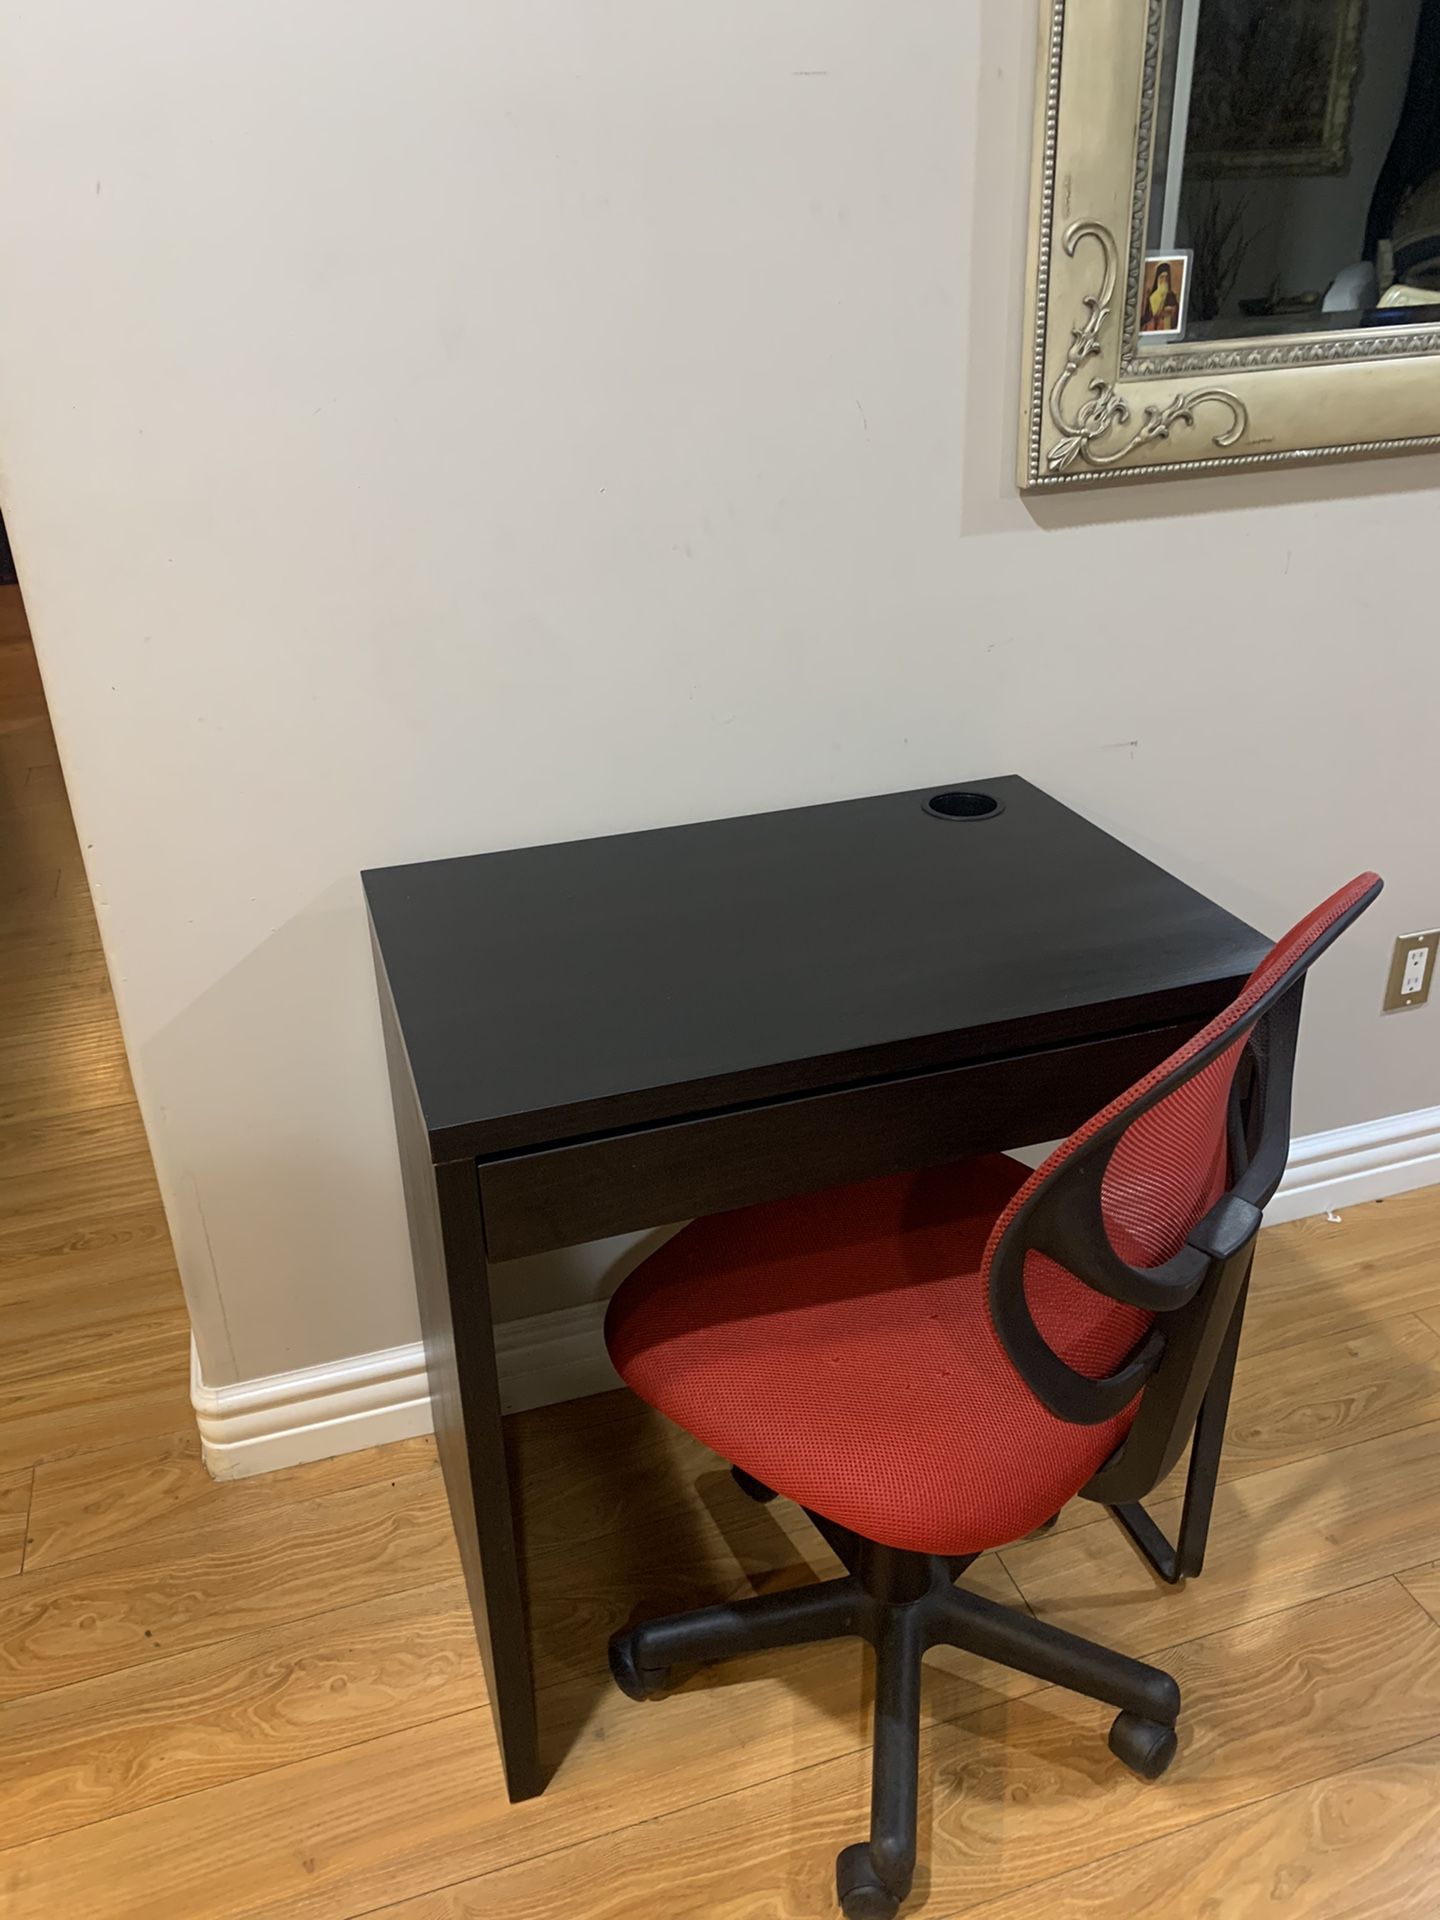 IKEA computer desk with chair